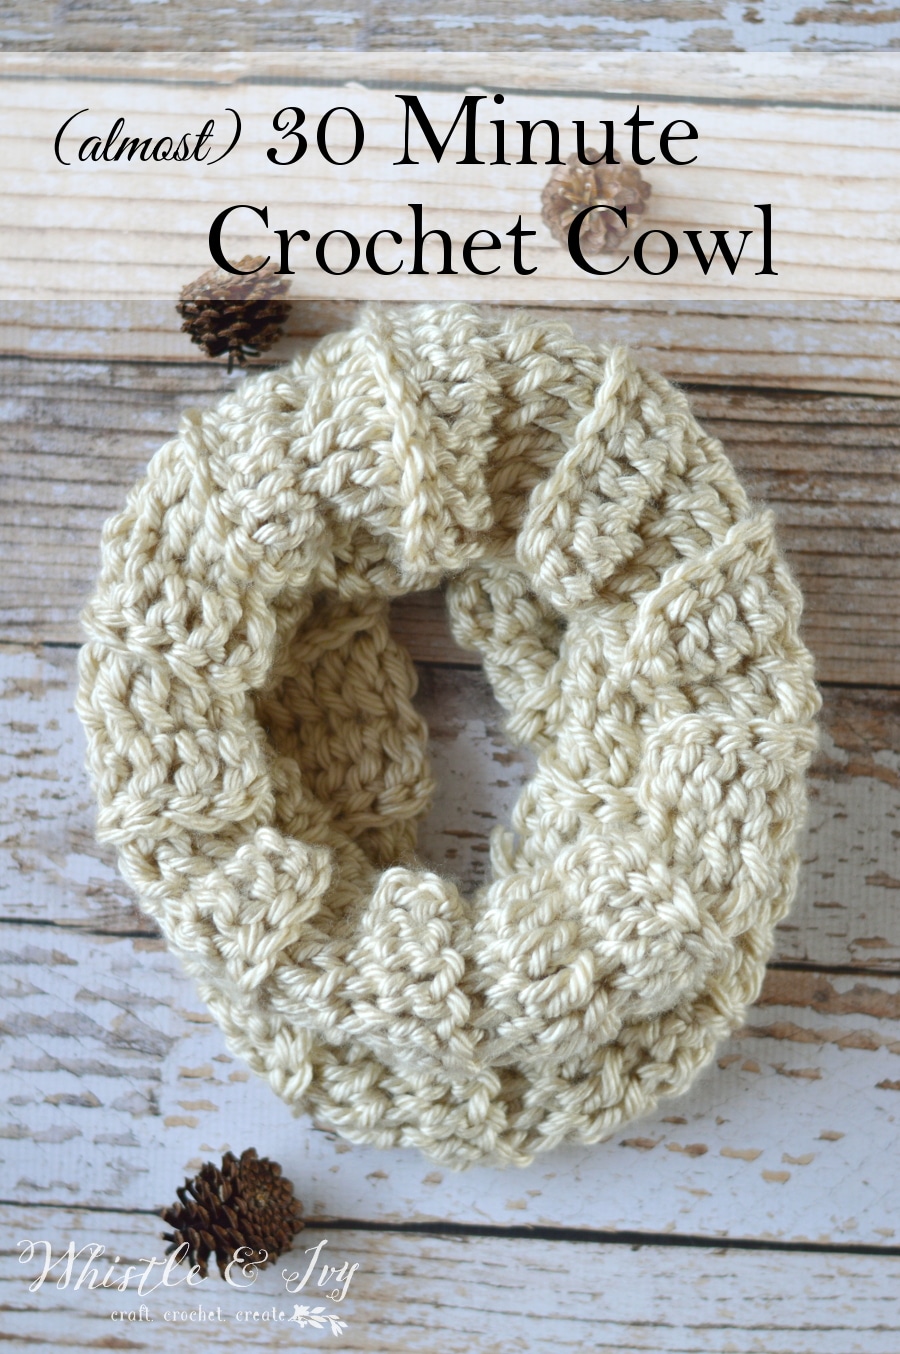 (almost) 30 Minute Crochet Cowl